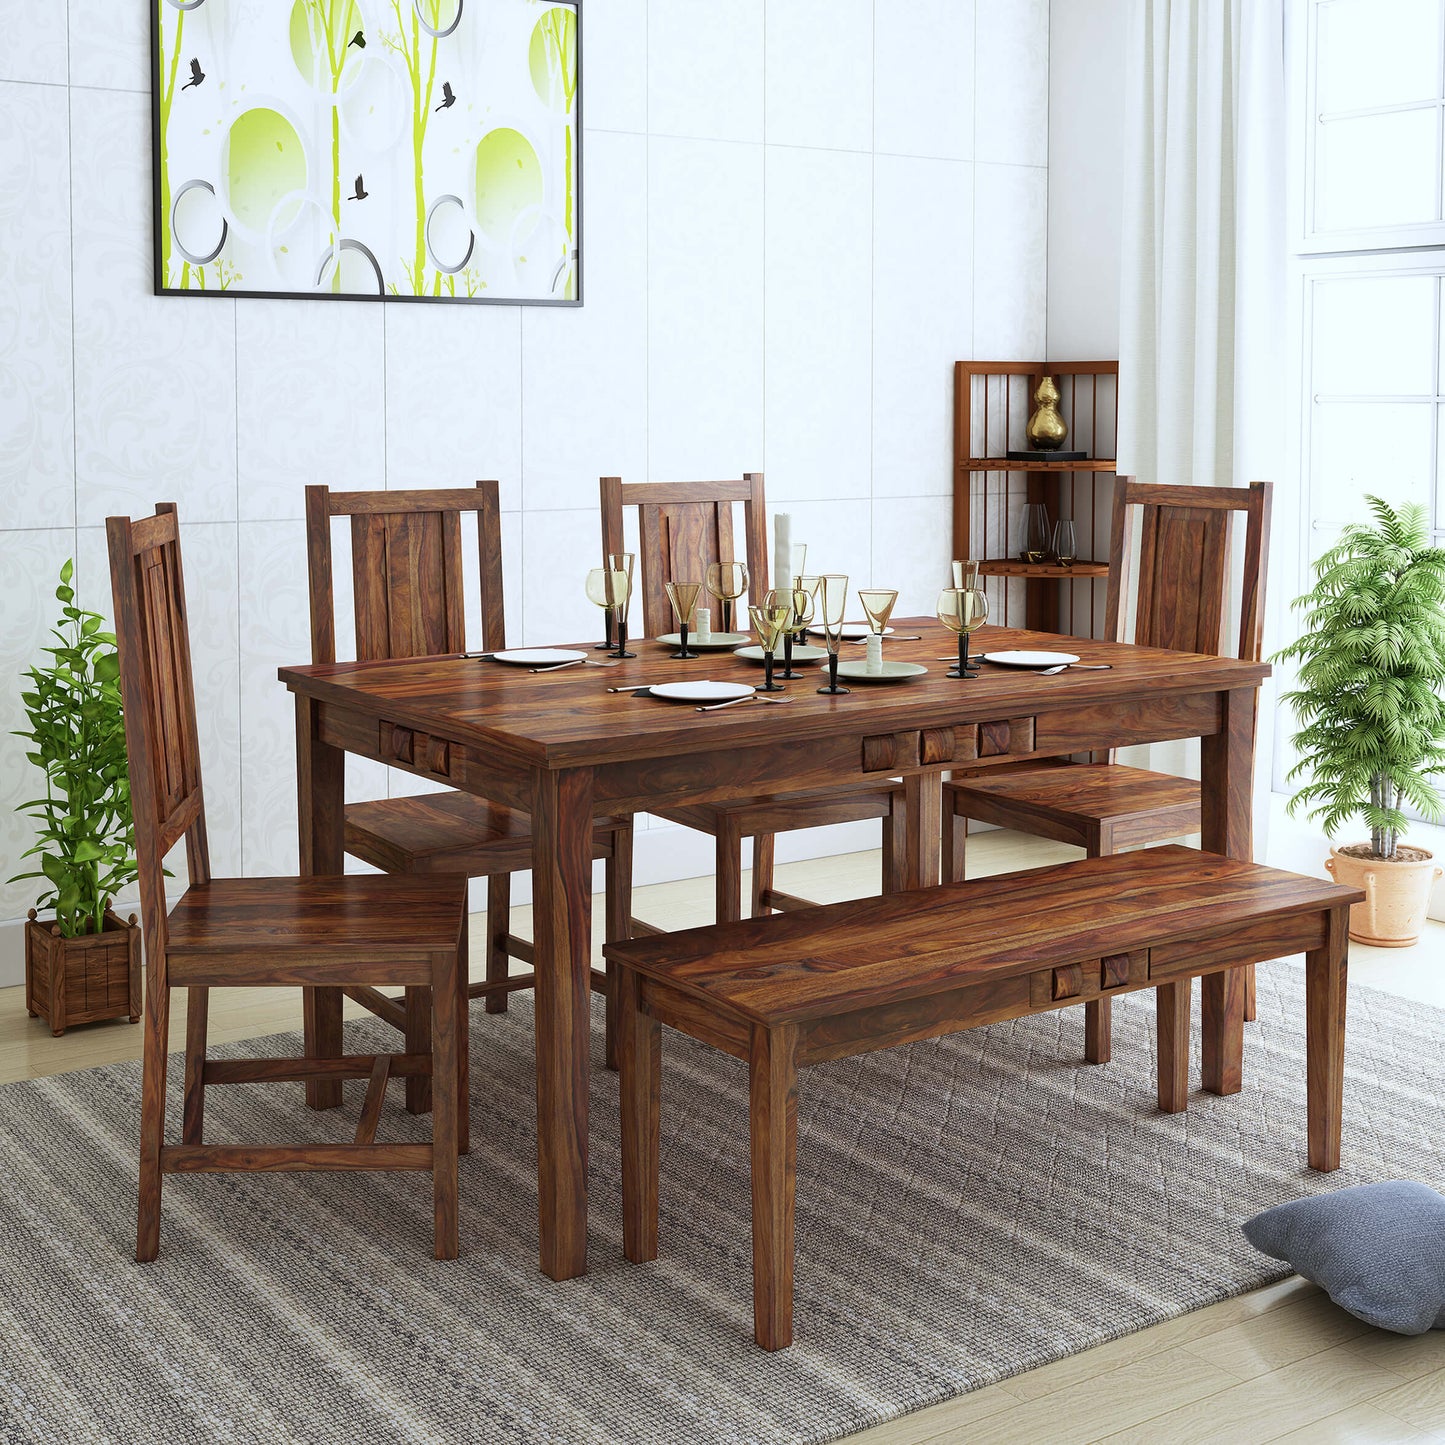 Weave Six Seater Dining With Bench-Teak